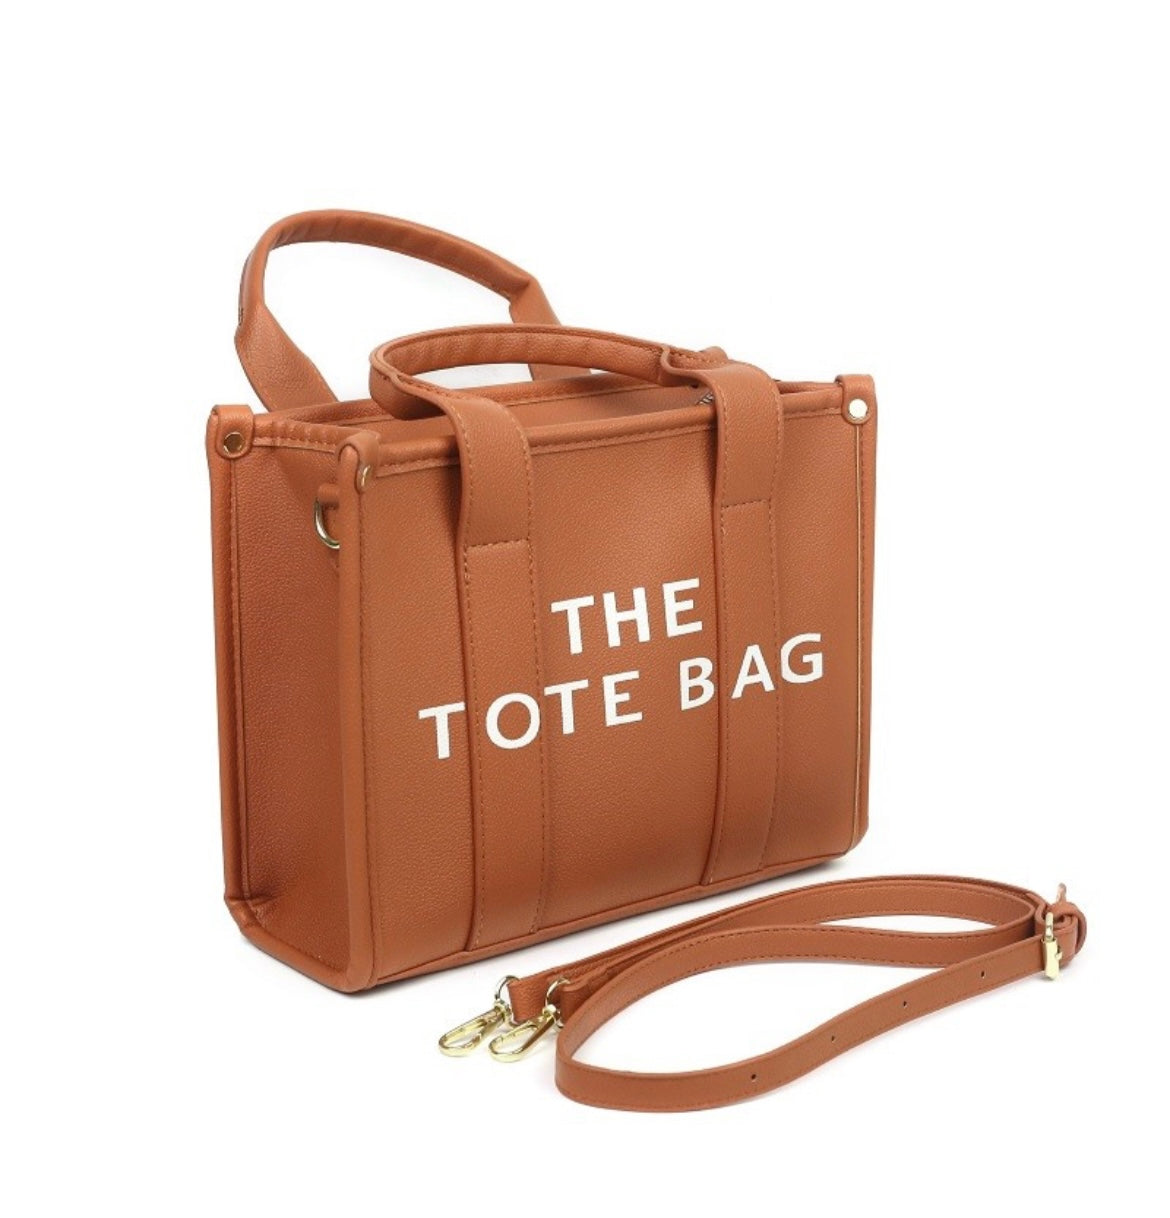 Dupe “The Tote Bag” (2 colors)